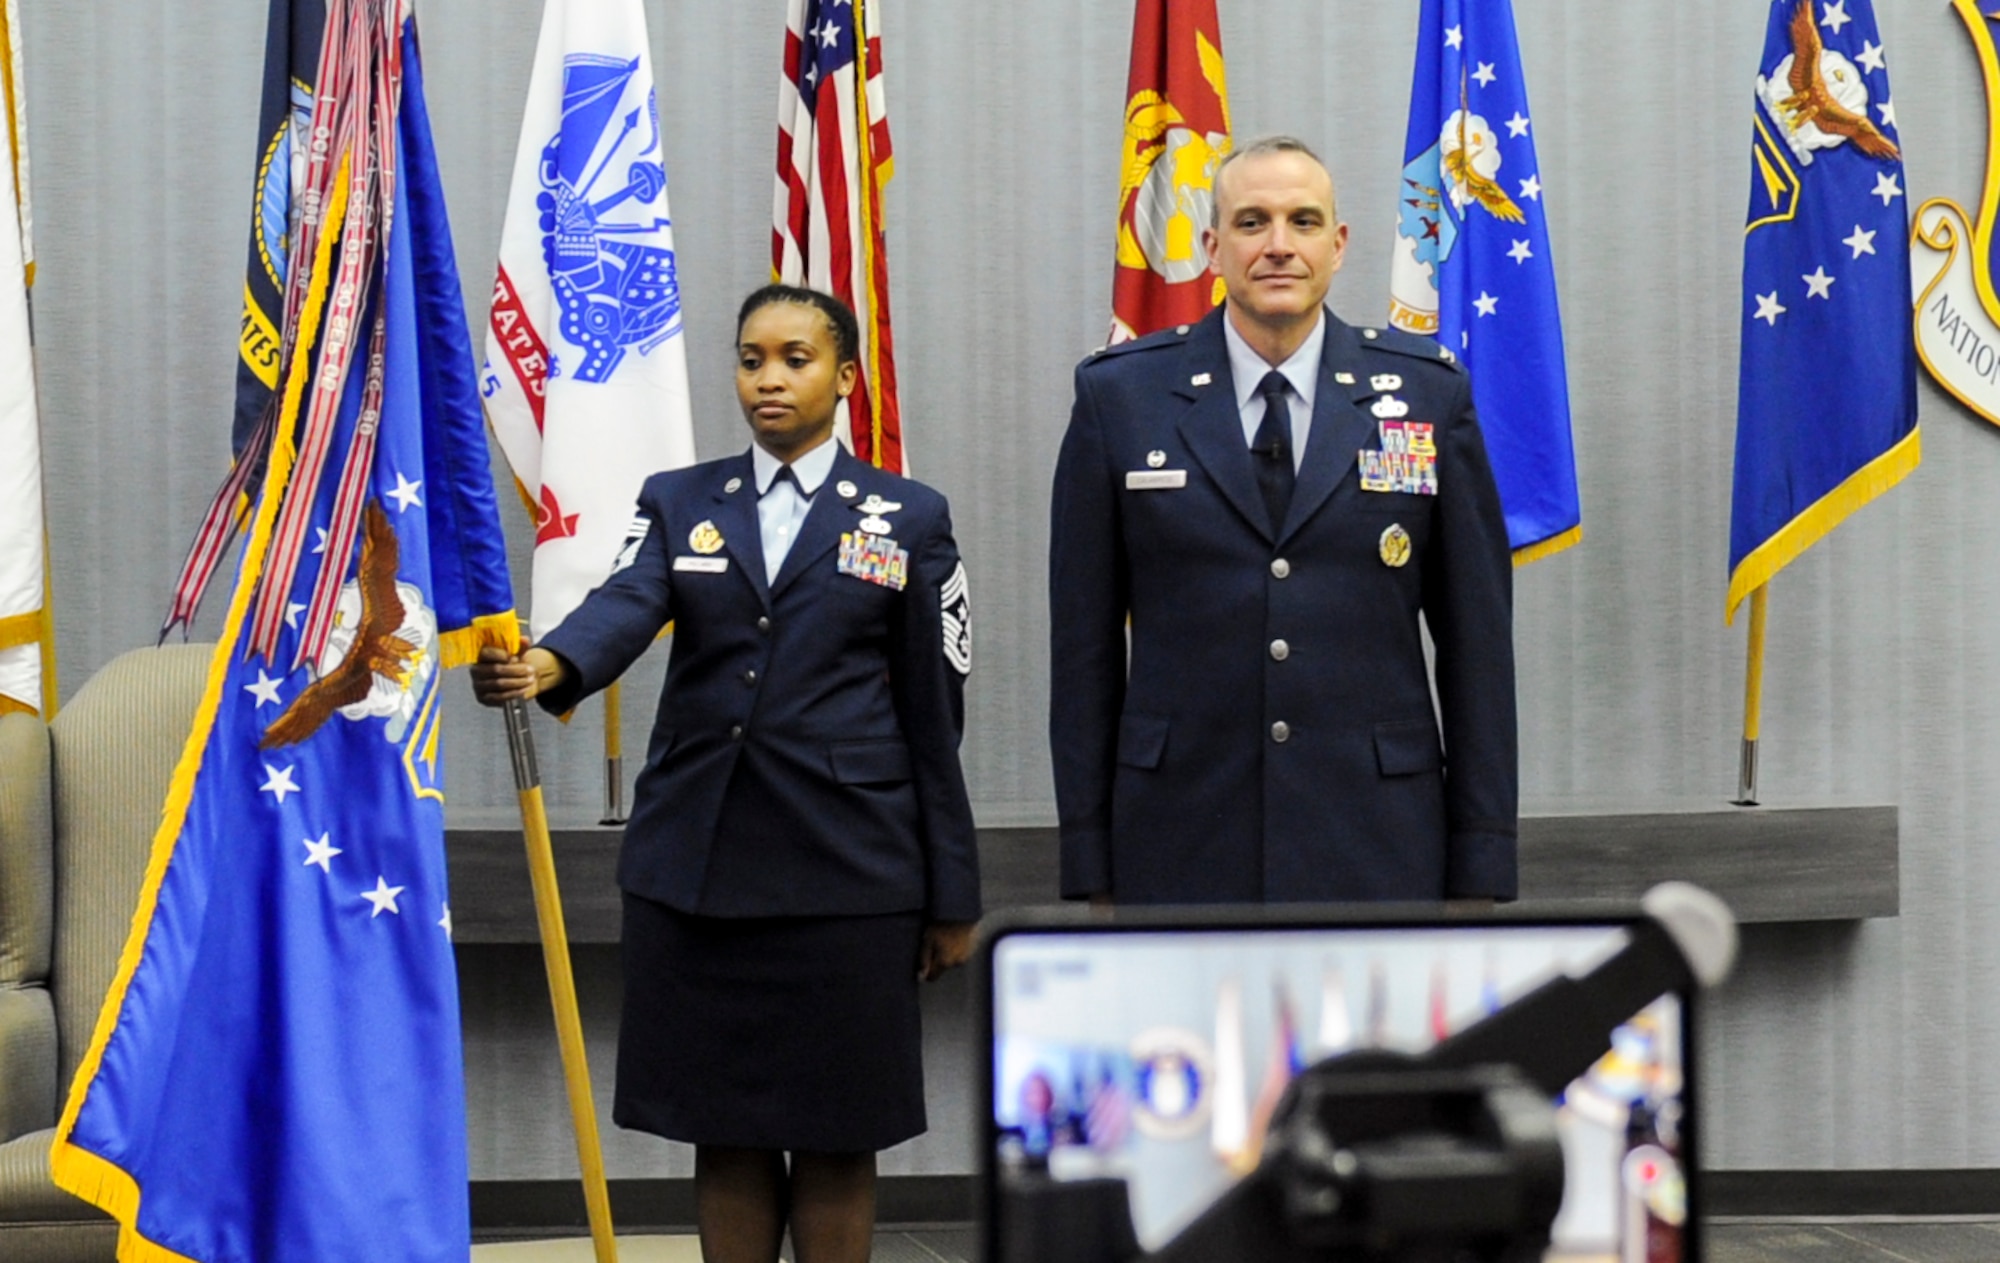 Chief Master Sgt. Kimberly Pollard, National Air and Space Intelligence Center Command Chief, stands with the NASIC flag during a ceremony honoring Col. Maurizio Calabrese as he assumed command of the Center June 9, 2020.